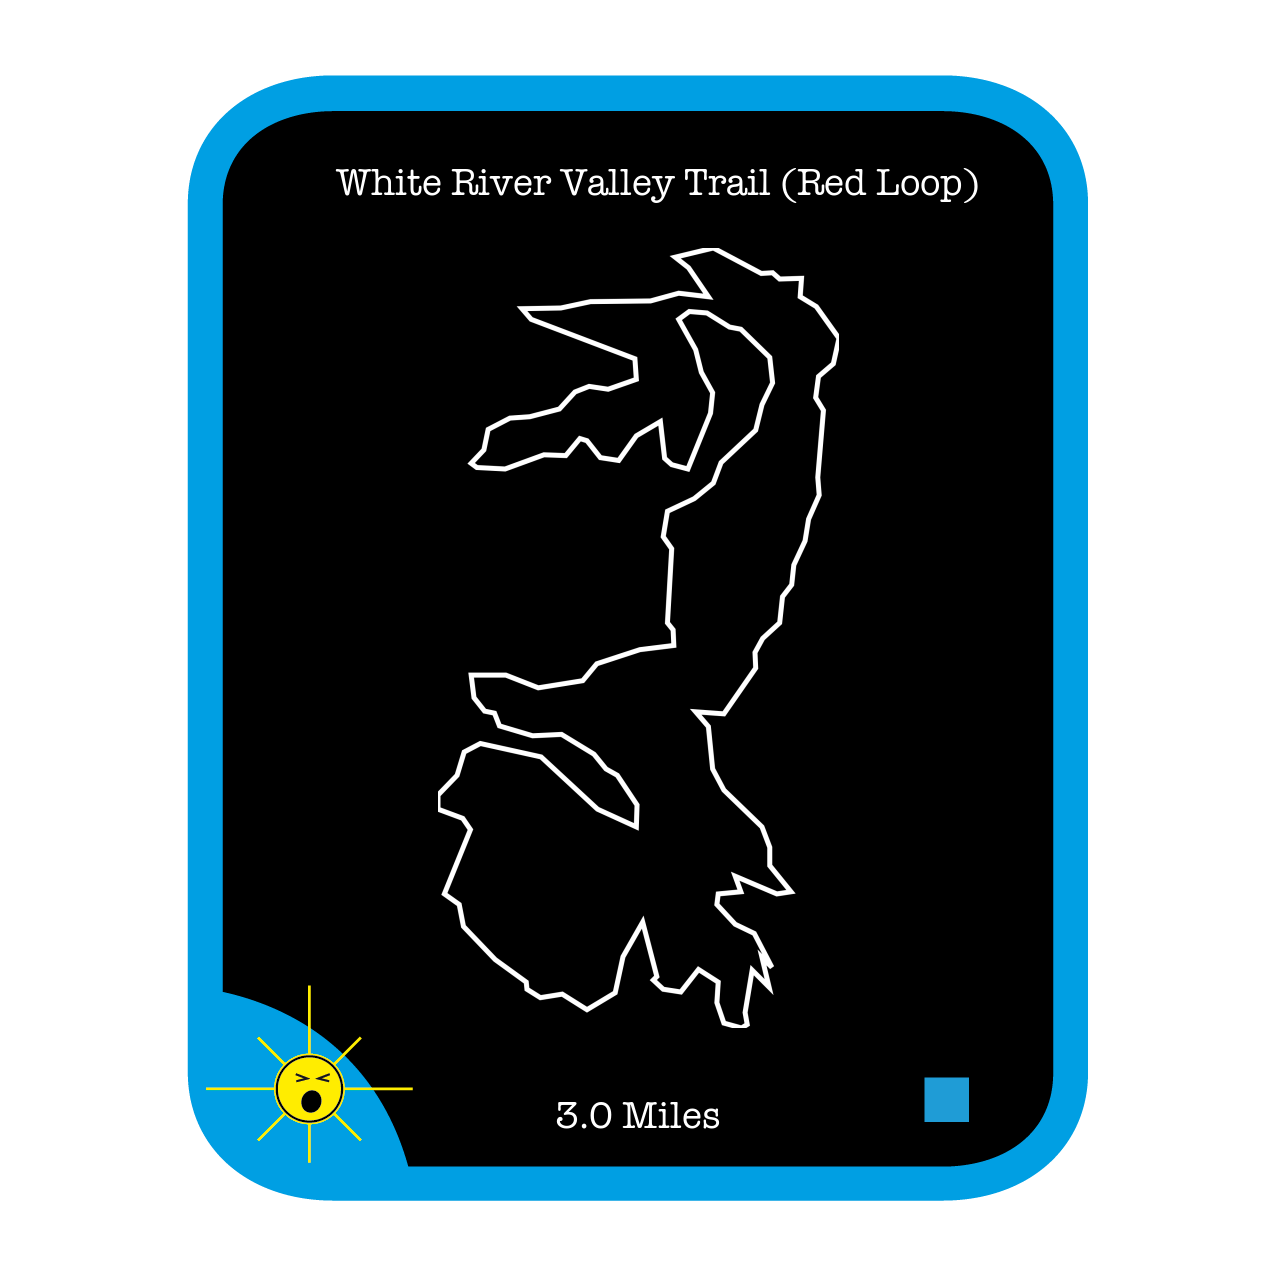 White River Valley Trail (Red Loop)